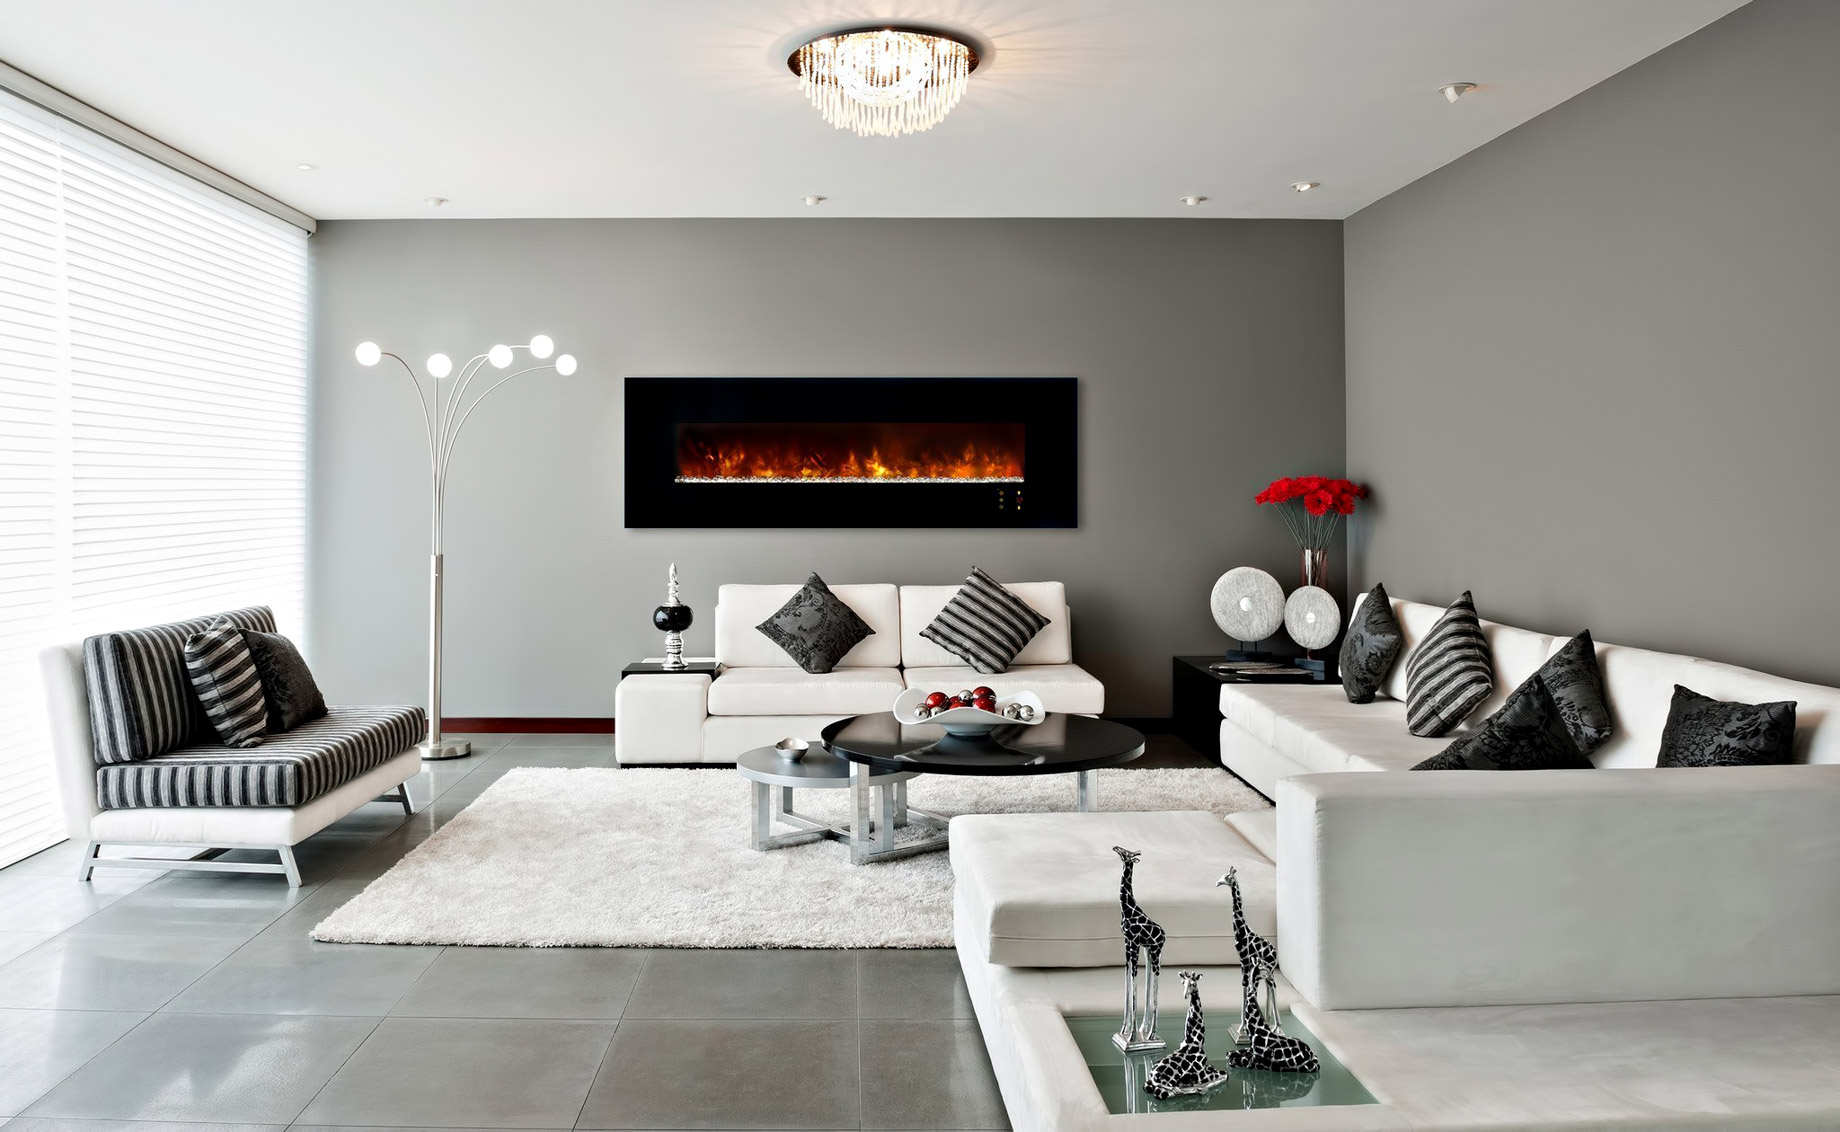 Electric Fireplaces - Home Renovation Tips - Fireplace Upgrade and Chimney Guide for Homeowners